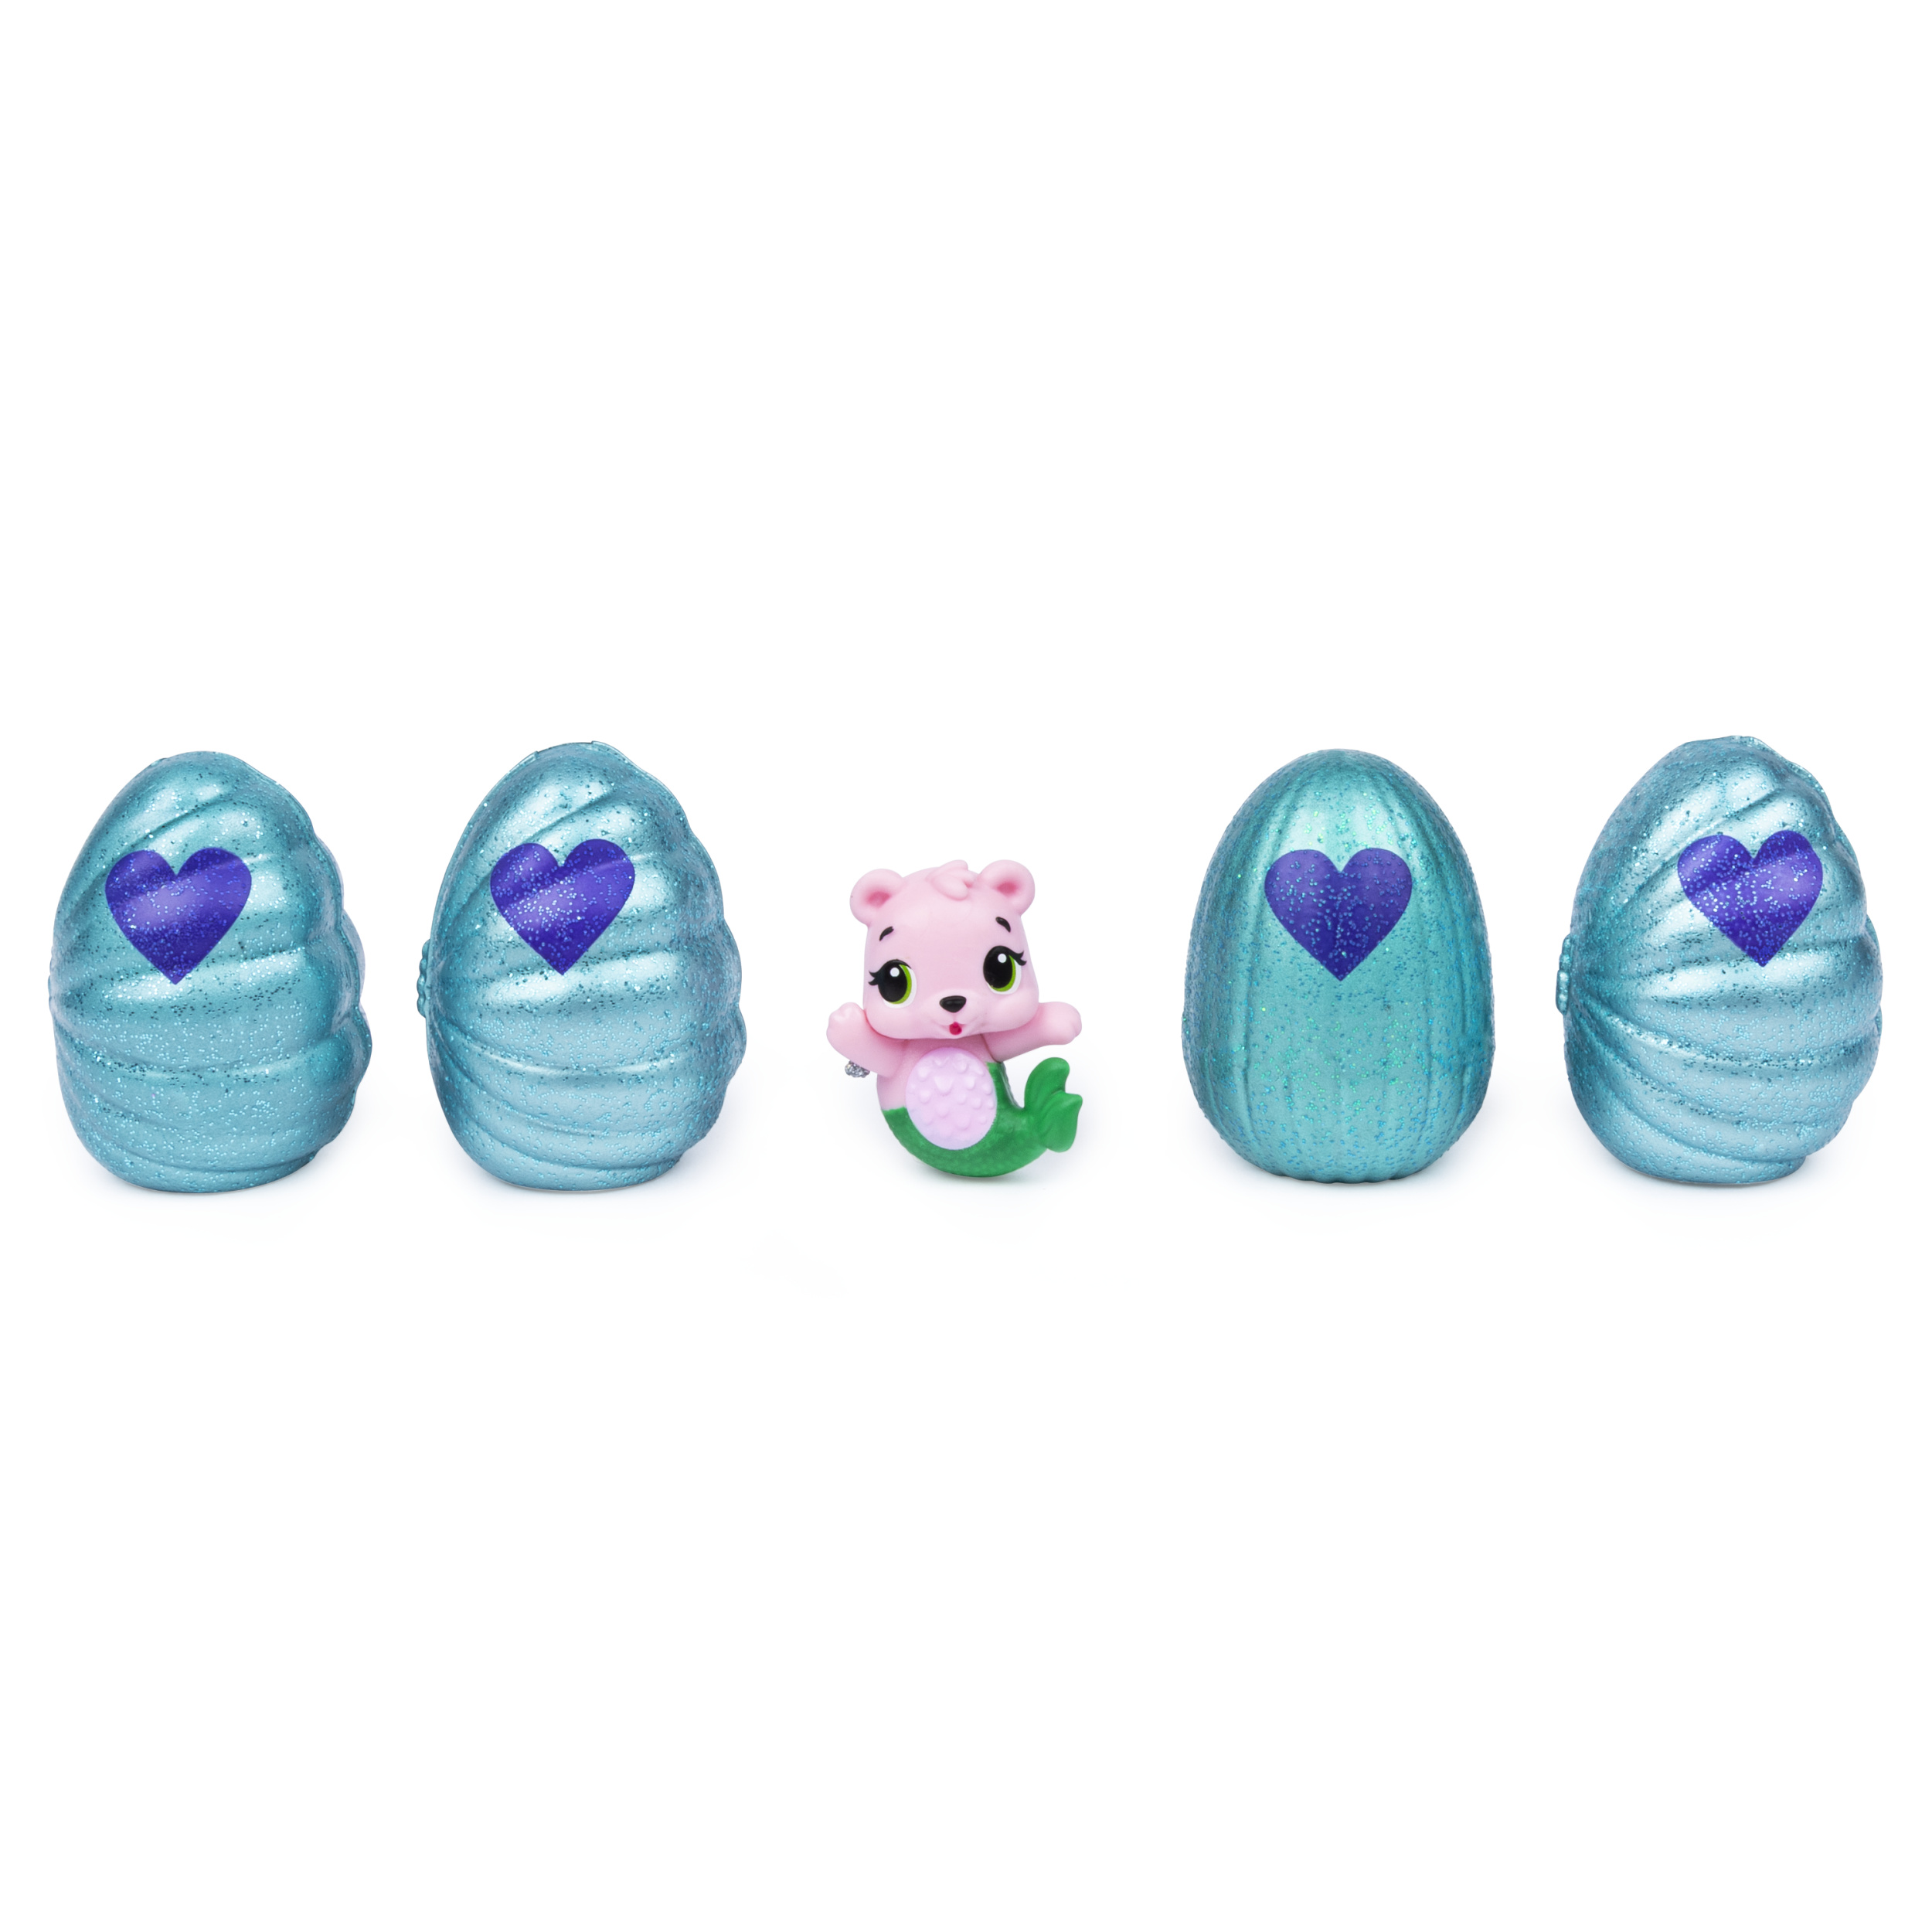 Hatchimals CollEGGtibles, Mermal Magic 4 Pack + Bonus with Season 5 Hatchimals, for Kids Aged 5 and Up (Styles May Vary) - image 4 of 8